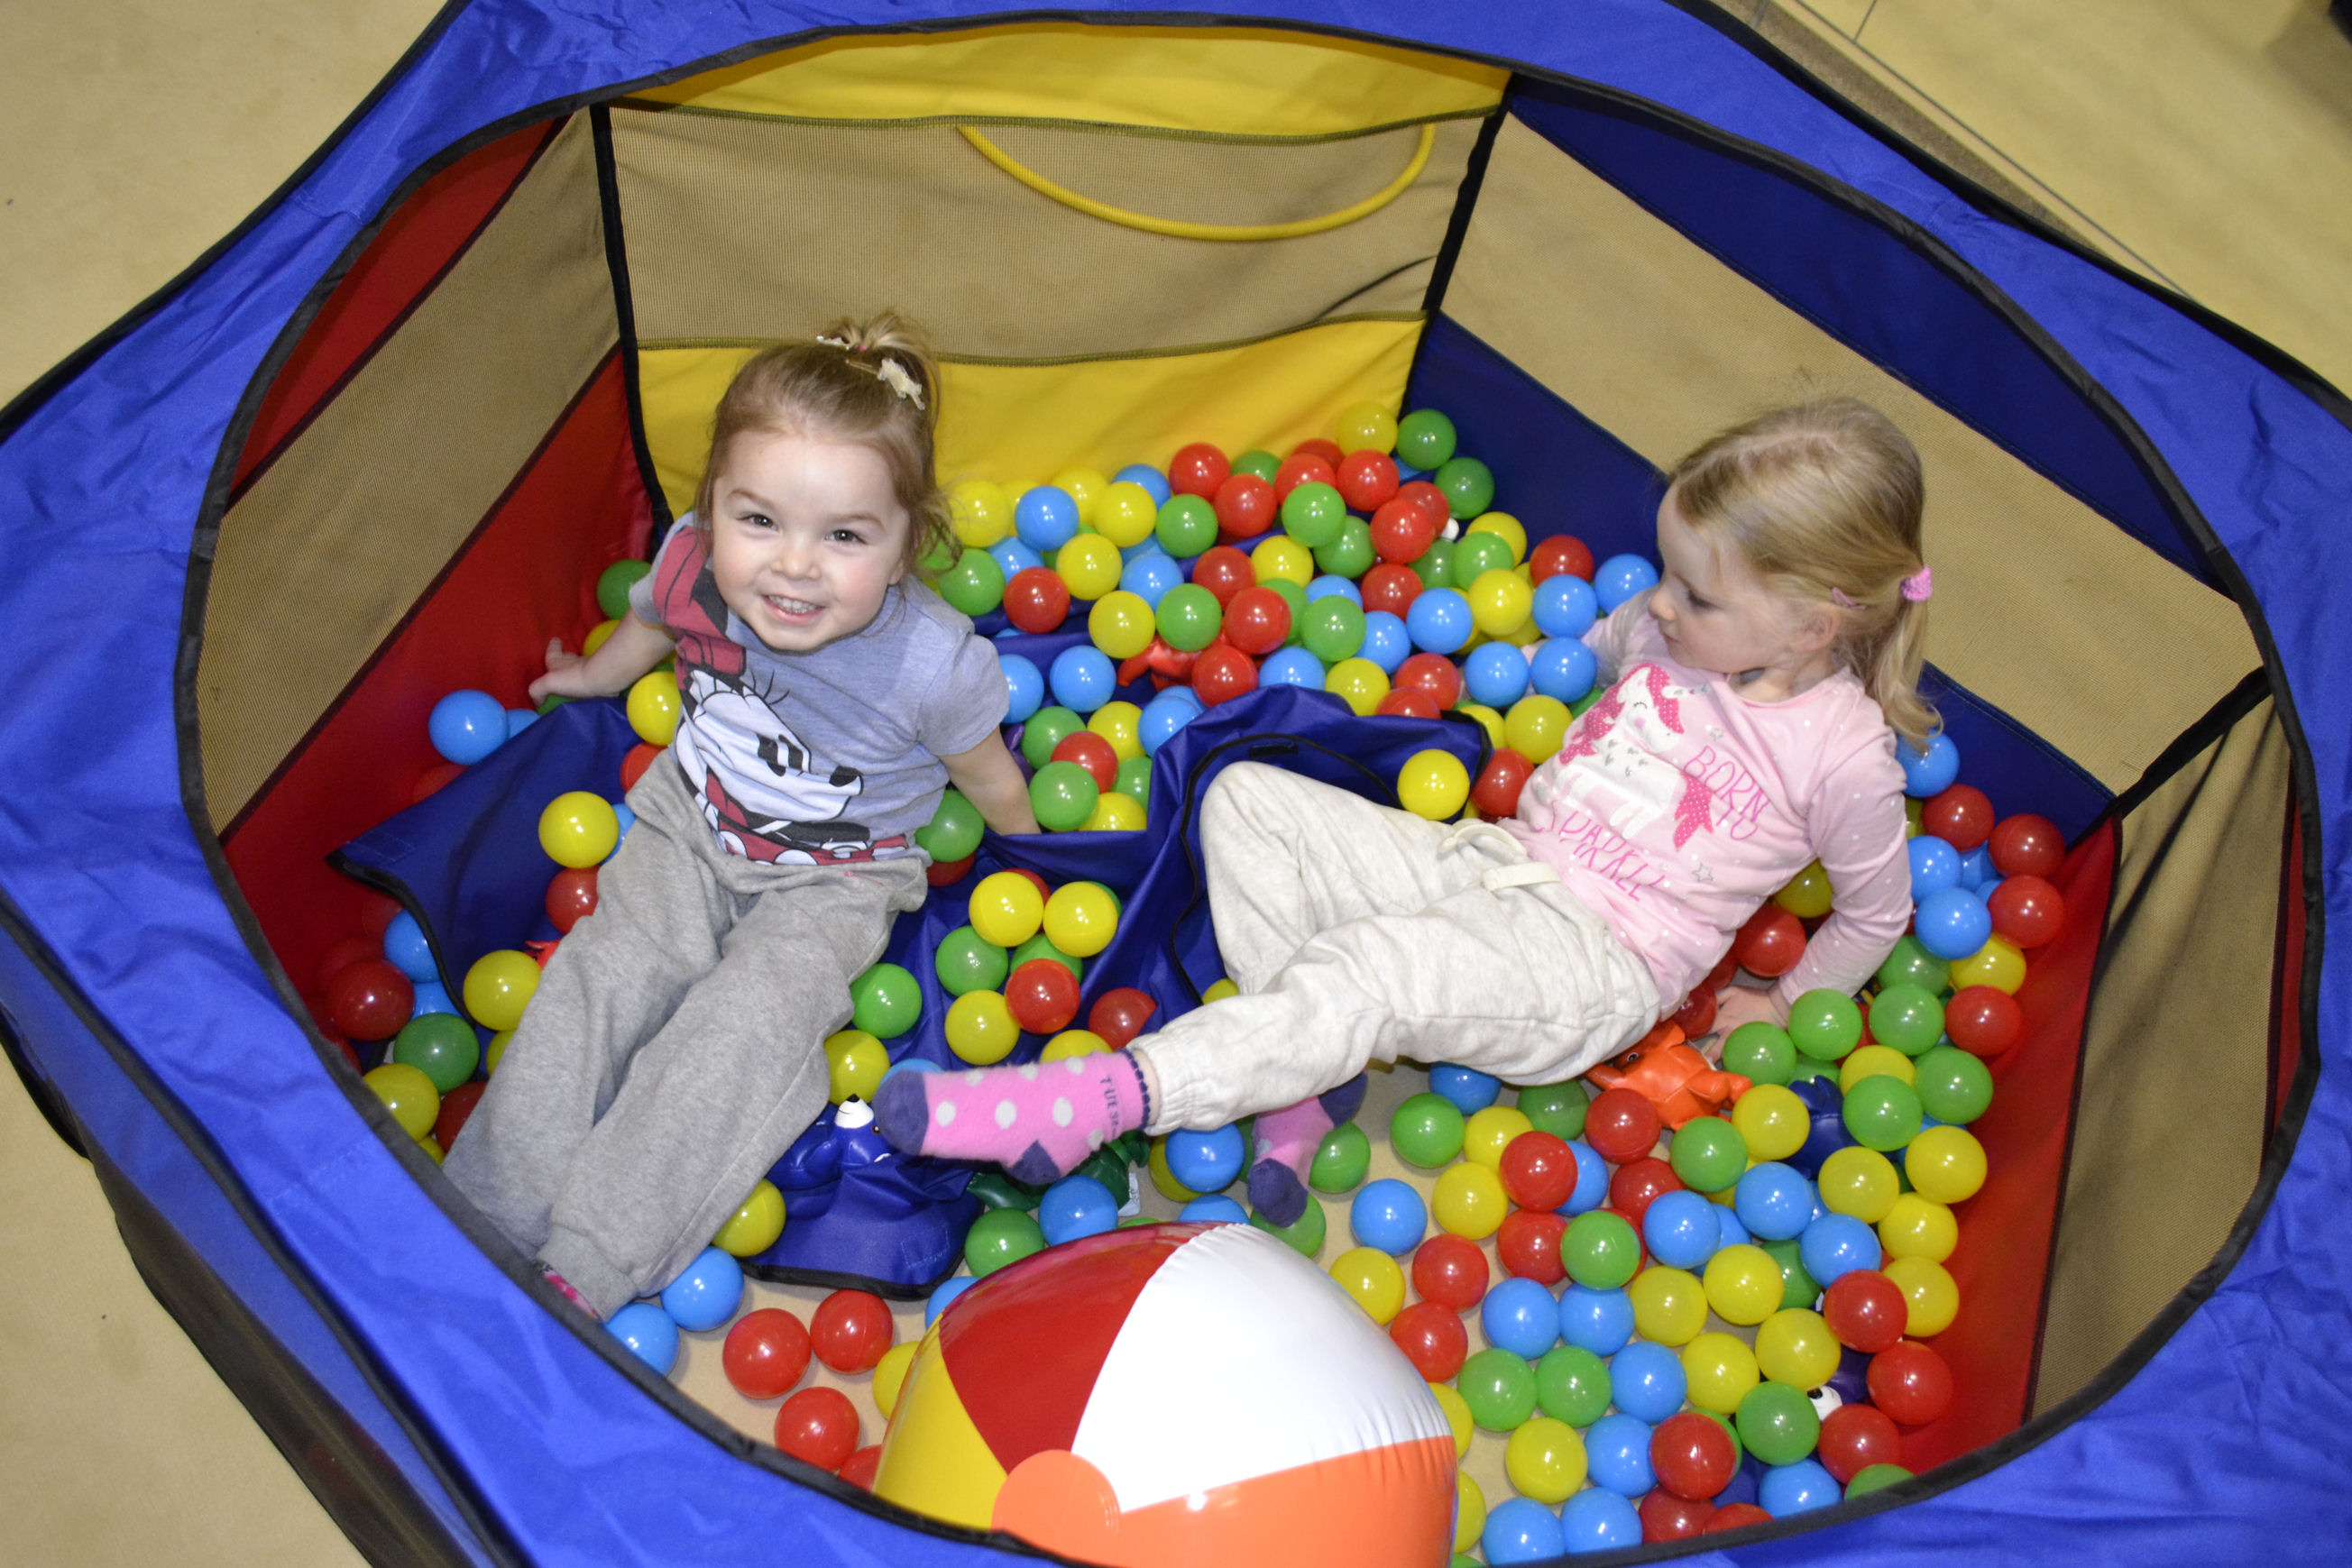 image of Gymnastics - 2 girls in a ball pit